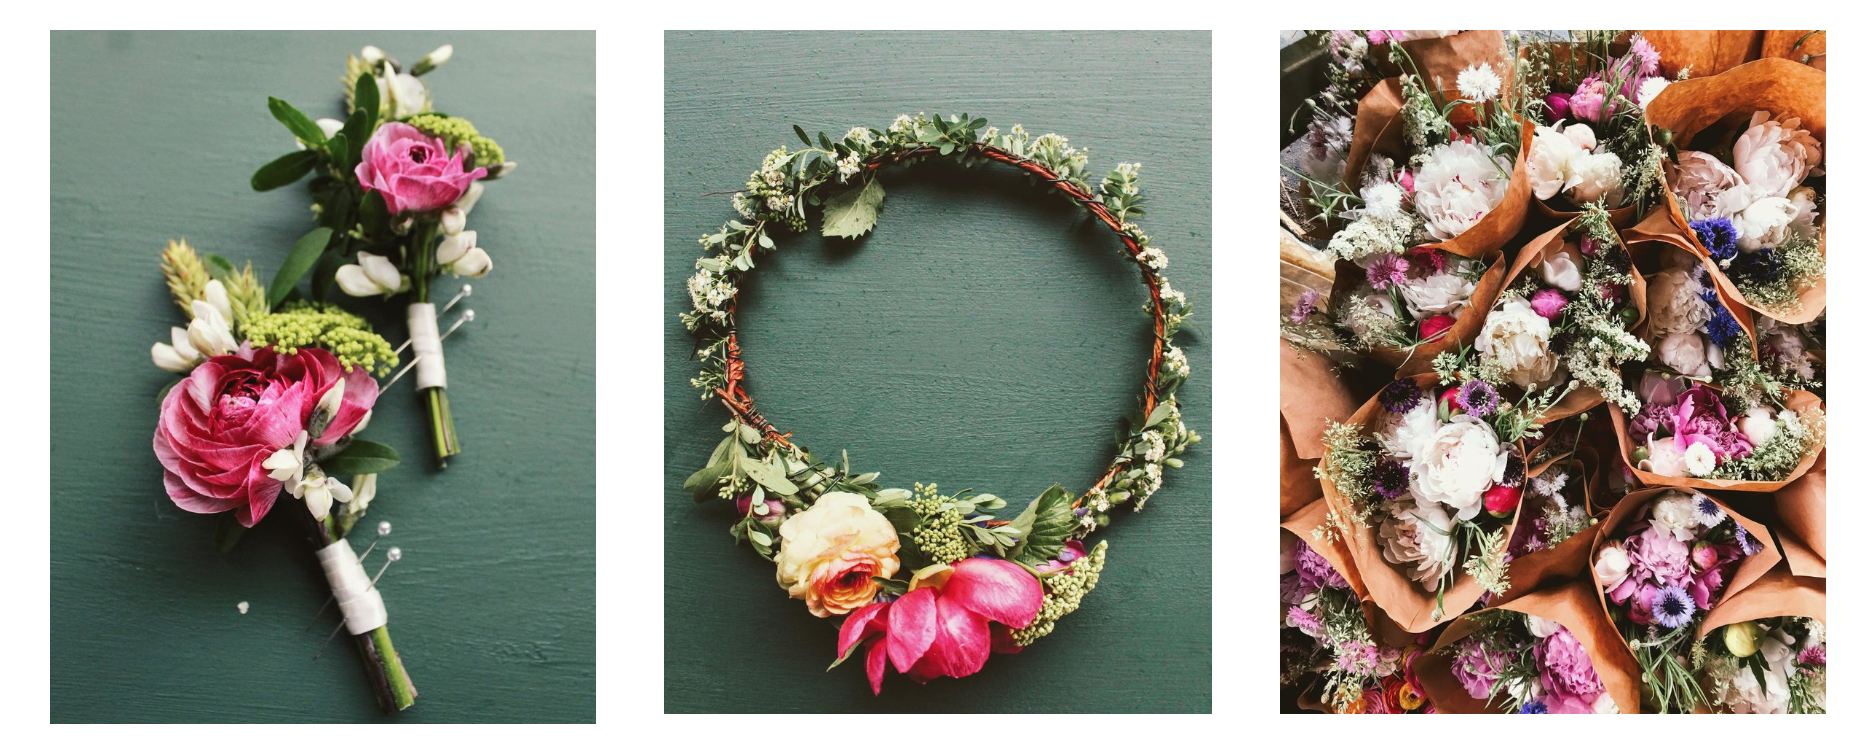 Wollam Gardens handmade Flower Crown Orders with Seana Shuchart Photography sessions